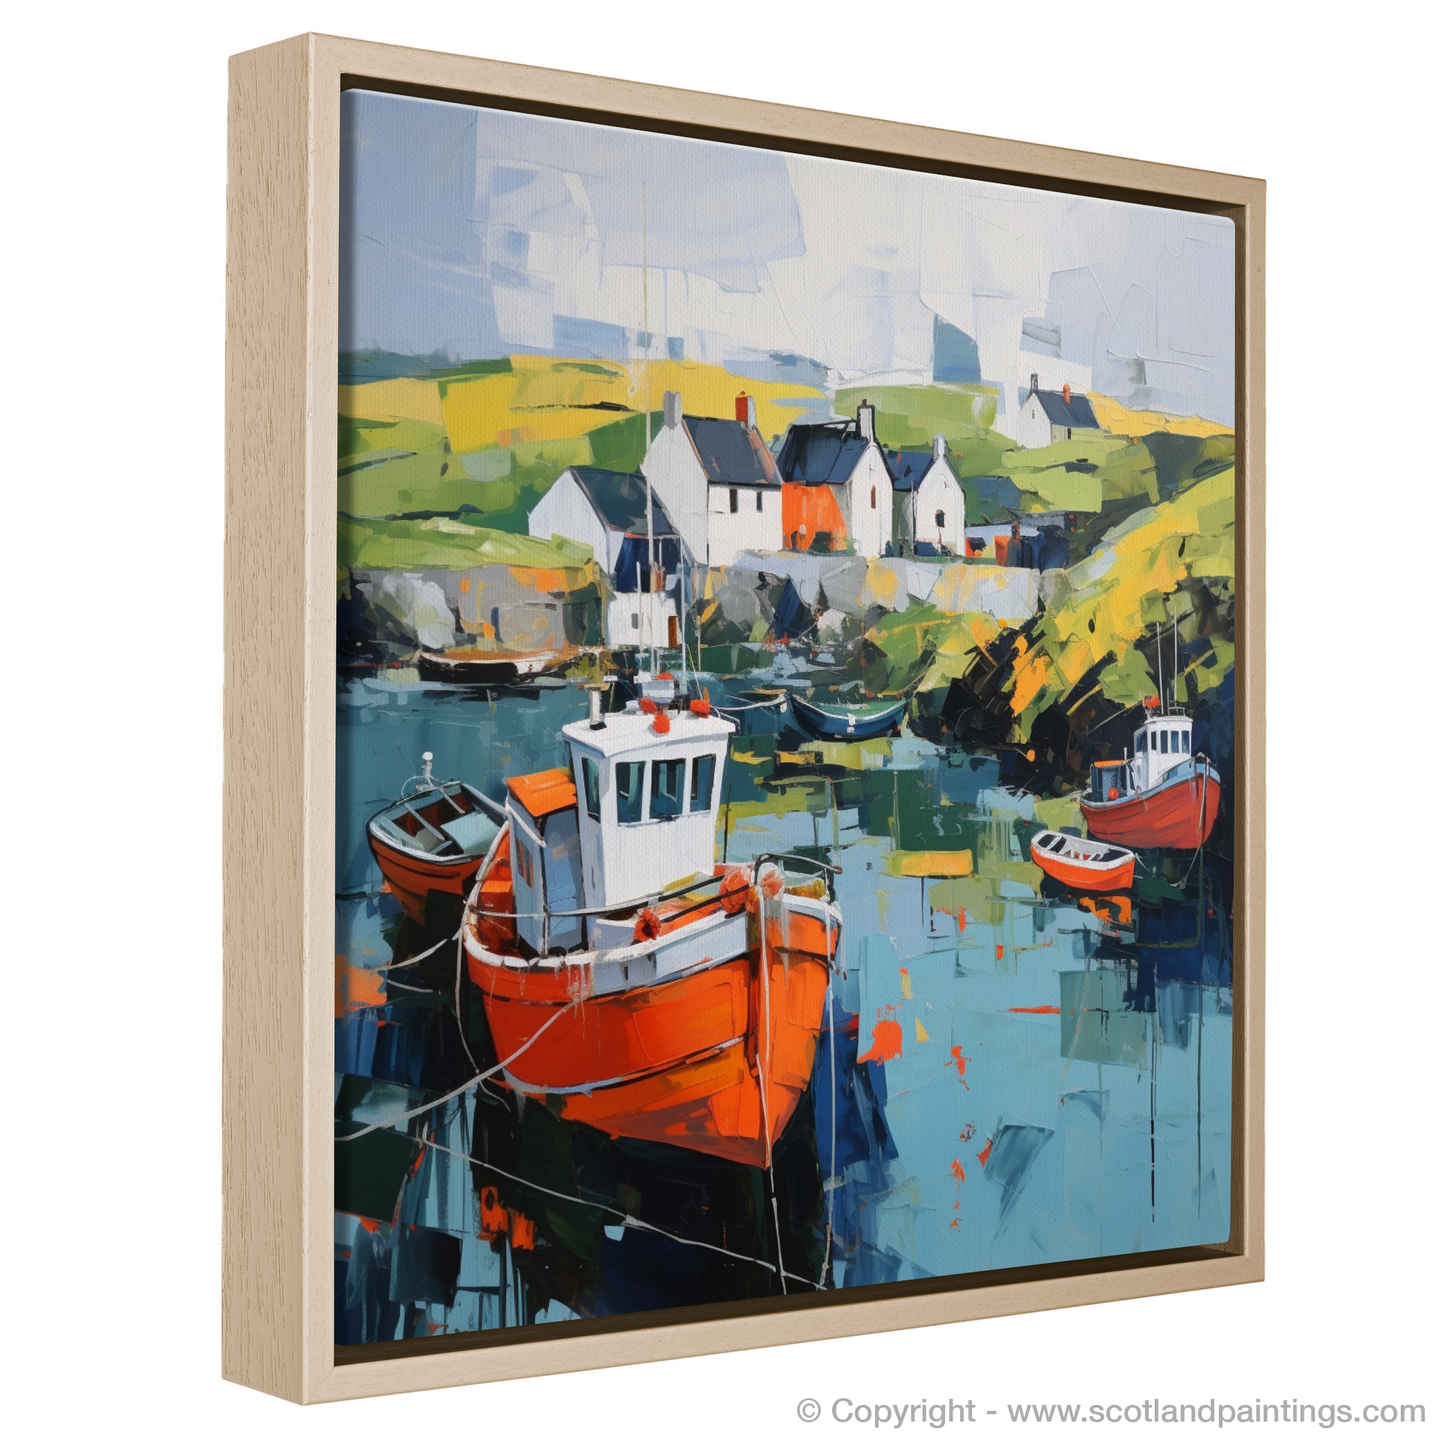 Painting and Art Print of Portnahaven Harbour, Isle of Islay entitled "Vibrant Reflections of Portnahaven Harbour".